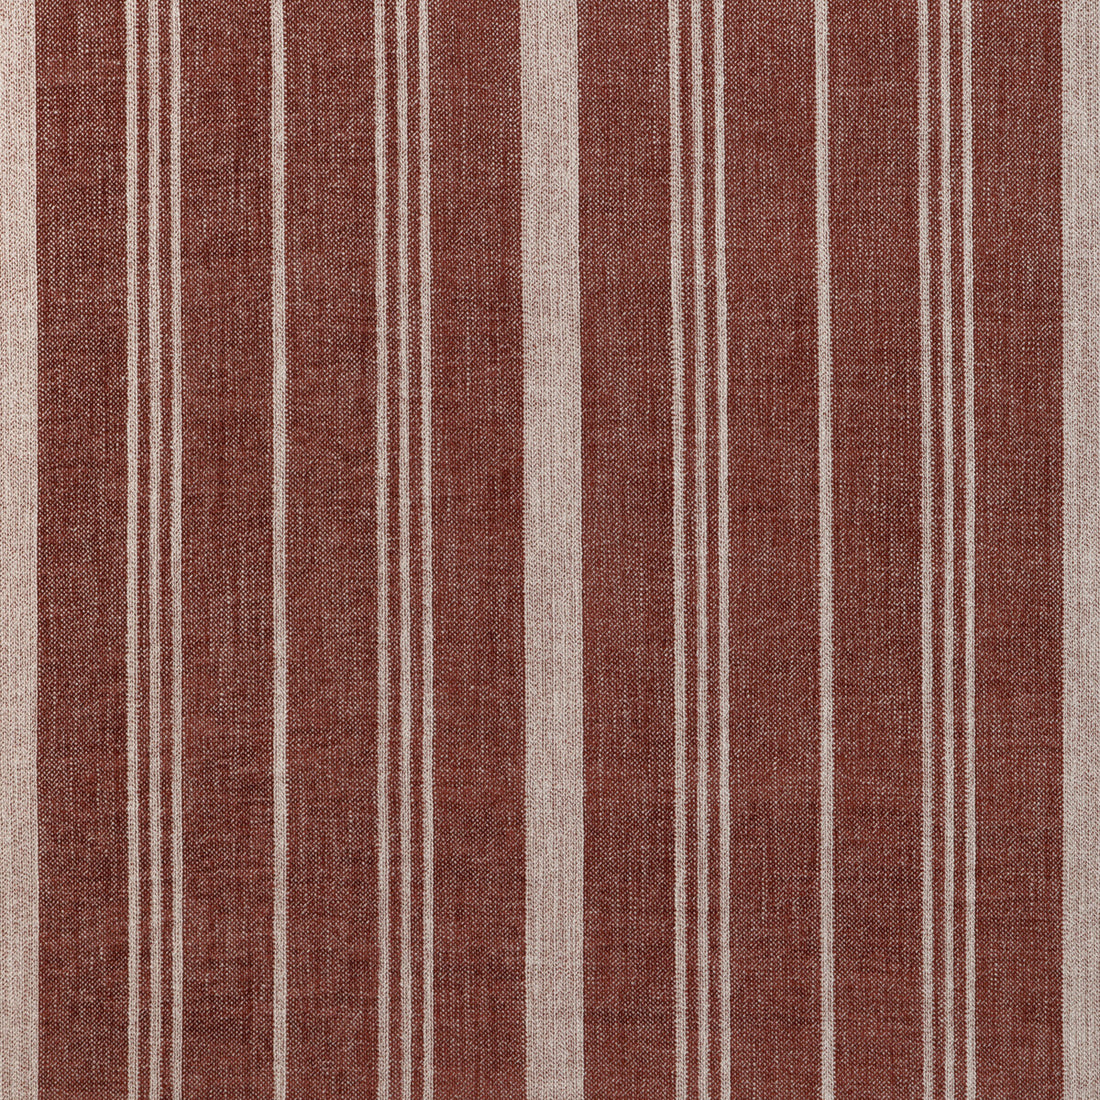 Furrow Stripe fabric in ruby color - pattern 36902.9.0 - by Kravet Couture in the Atelier Weaves collection